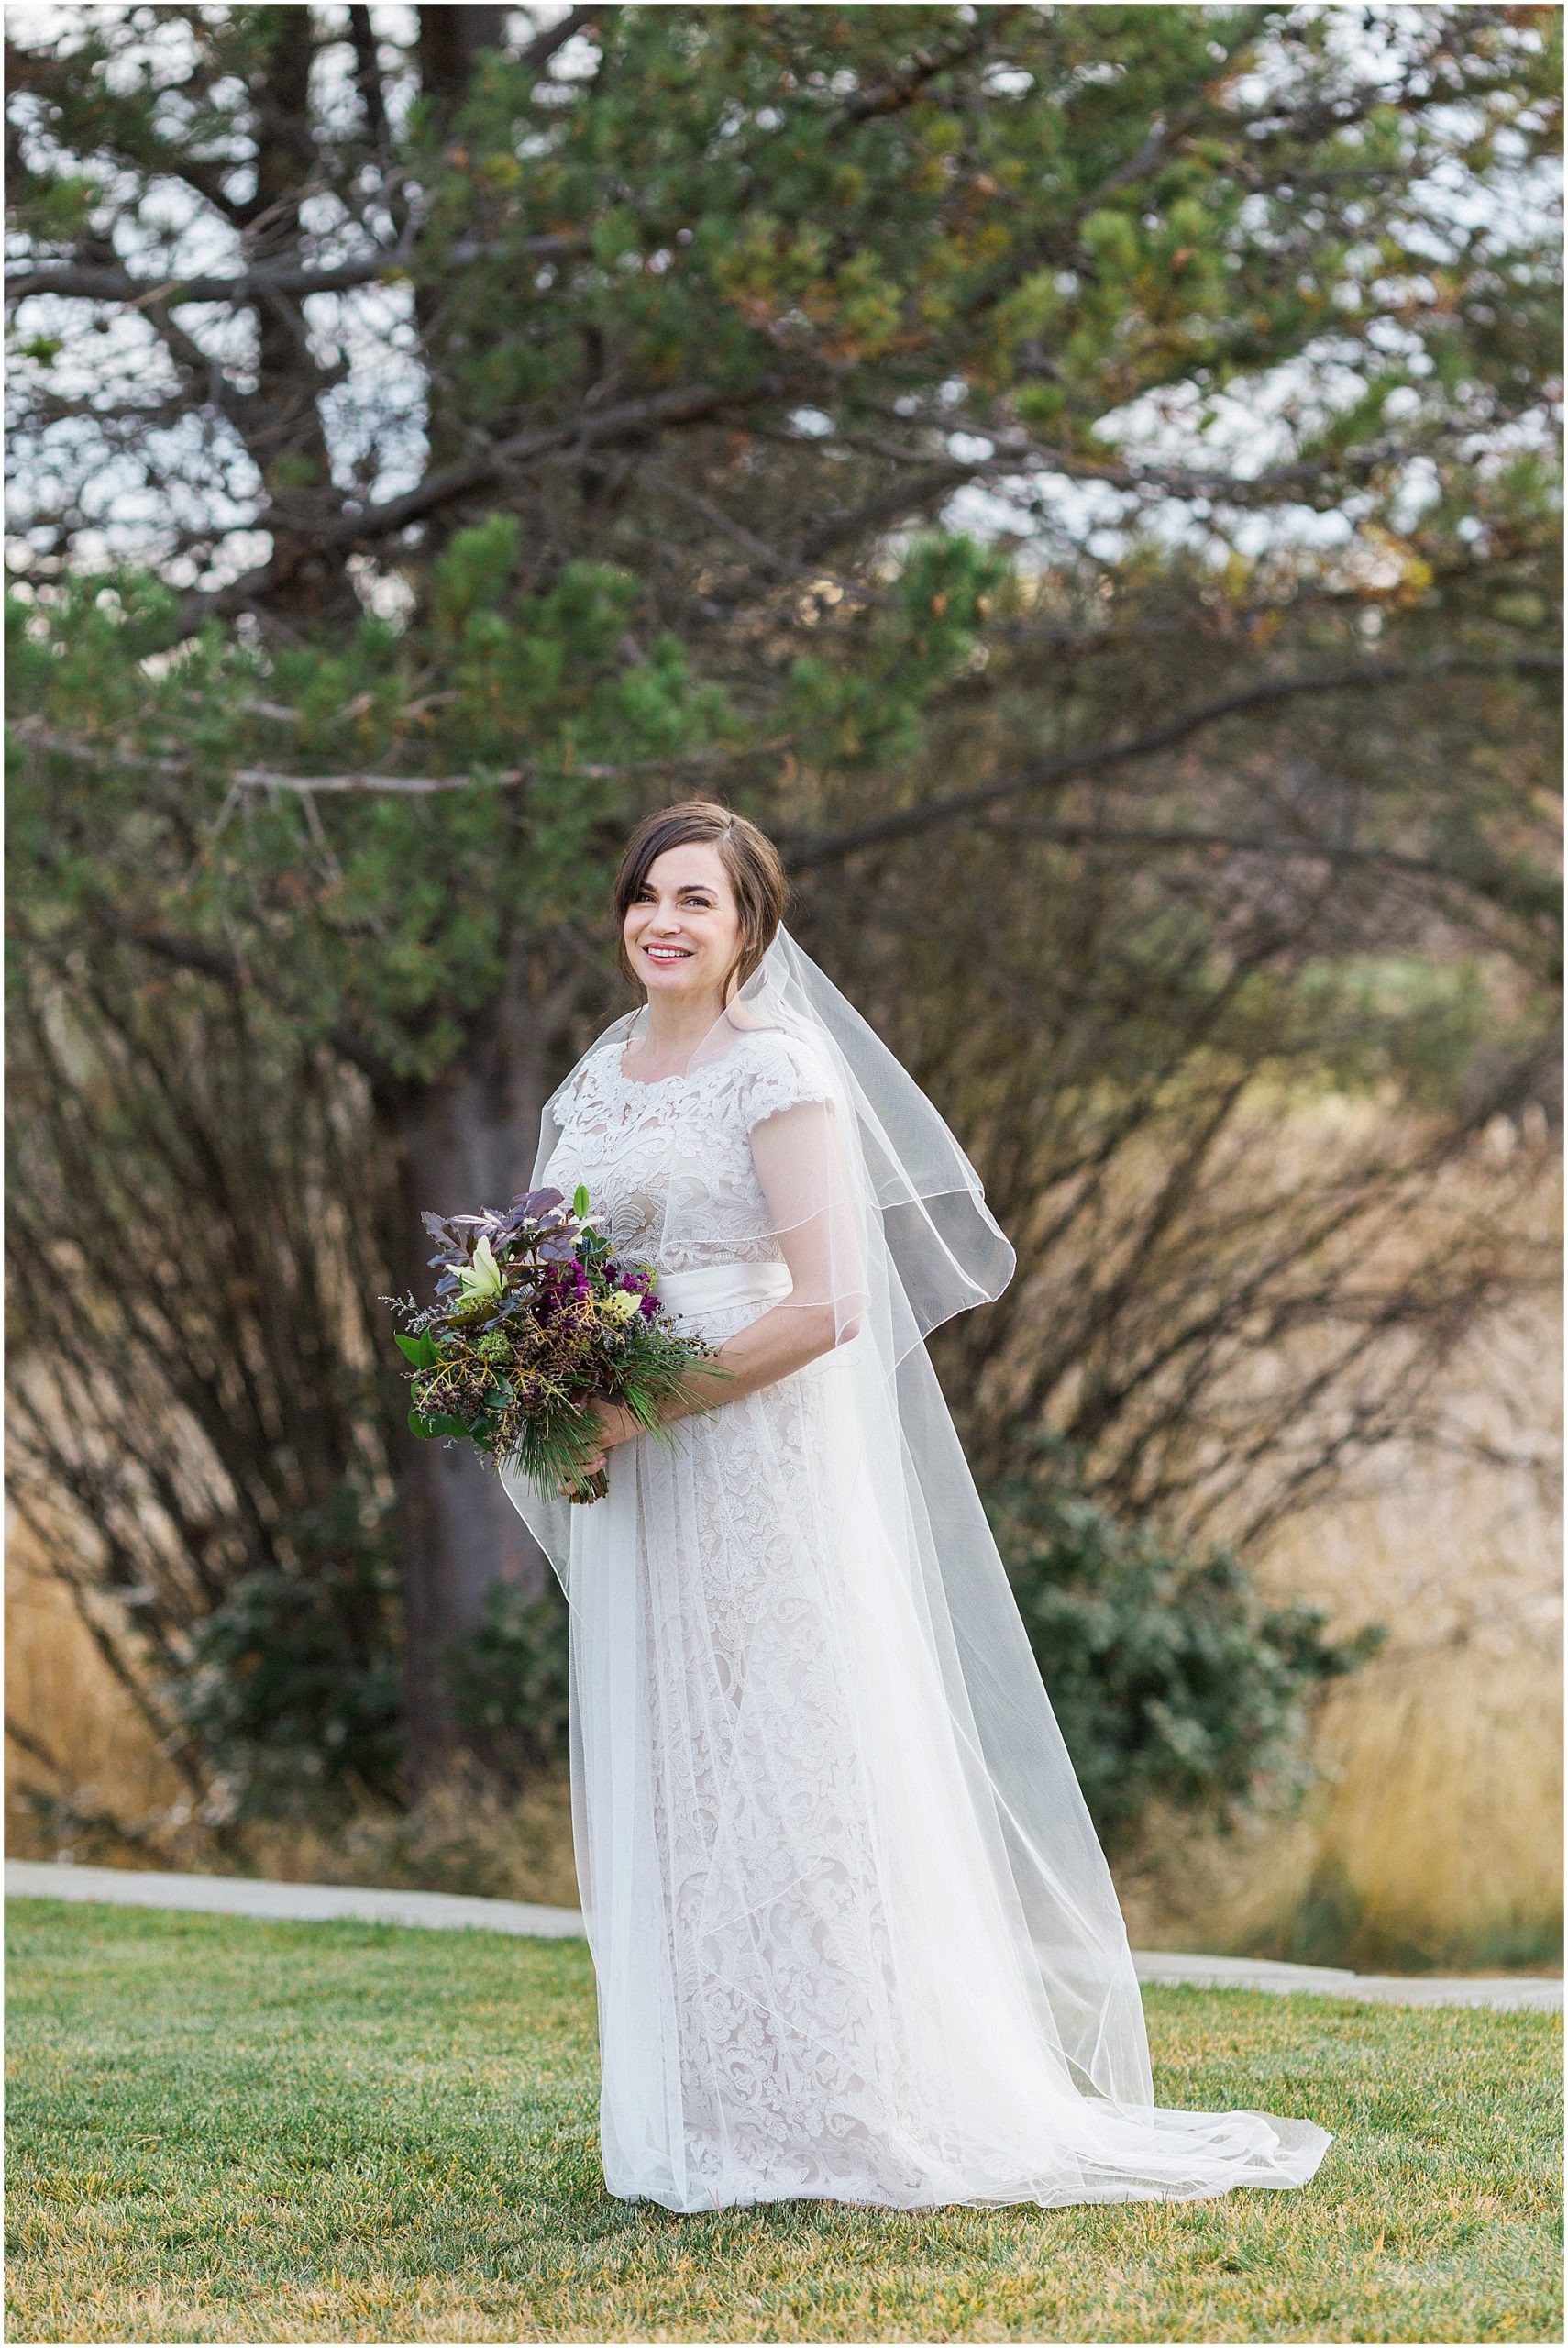 A stunning bride wearing a gorgeous cap sleeved lace gown. Perfect for her winter wedding at Sunriver Resort in Oregon. | Erica Swantek Photography